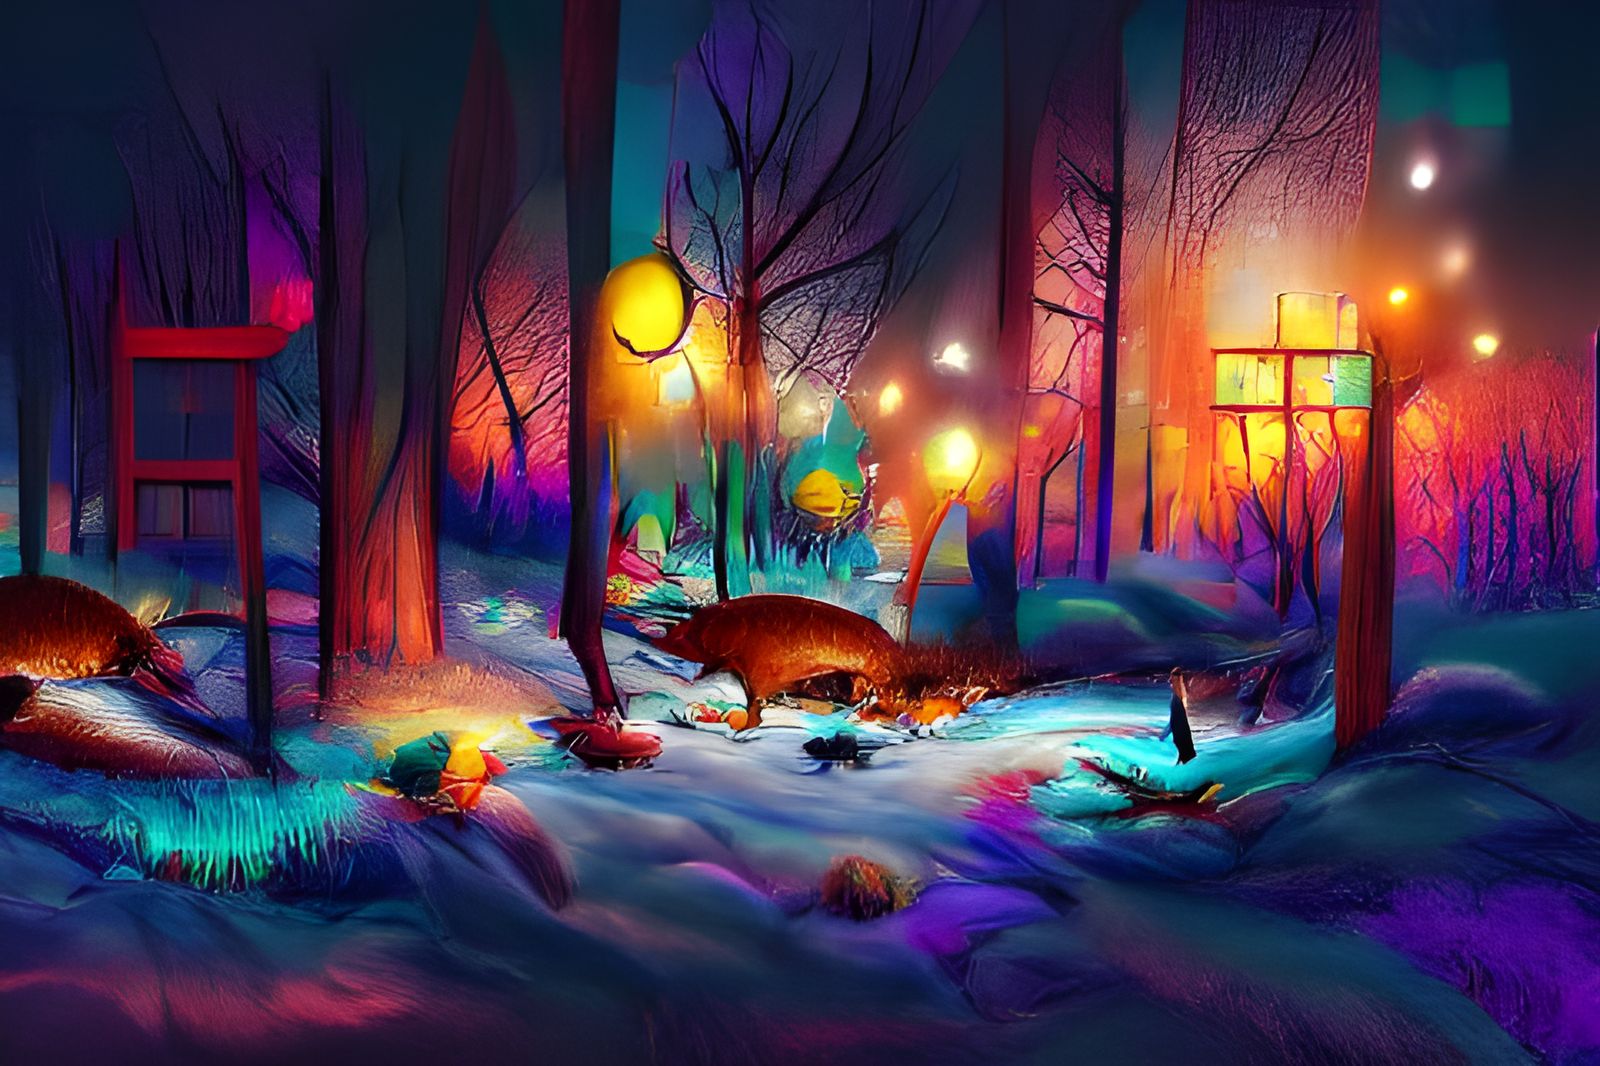 A winter night in the woods